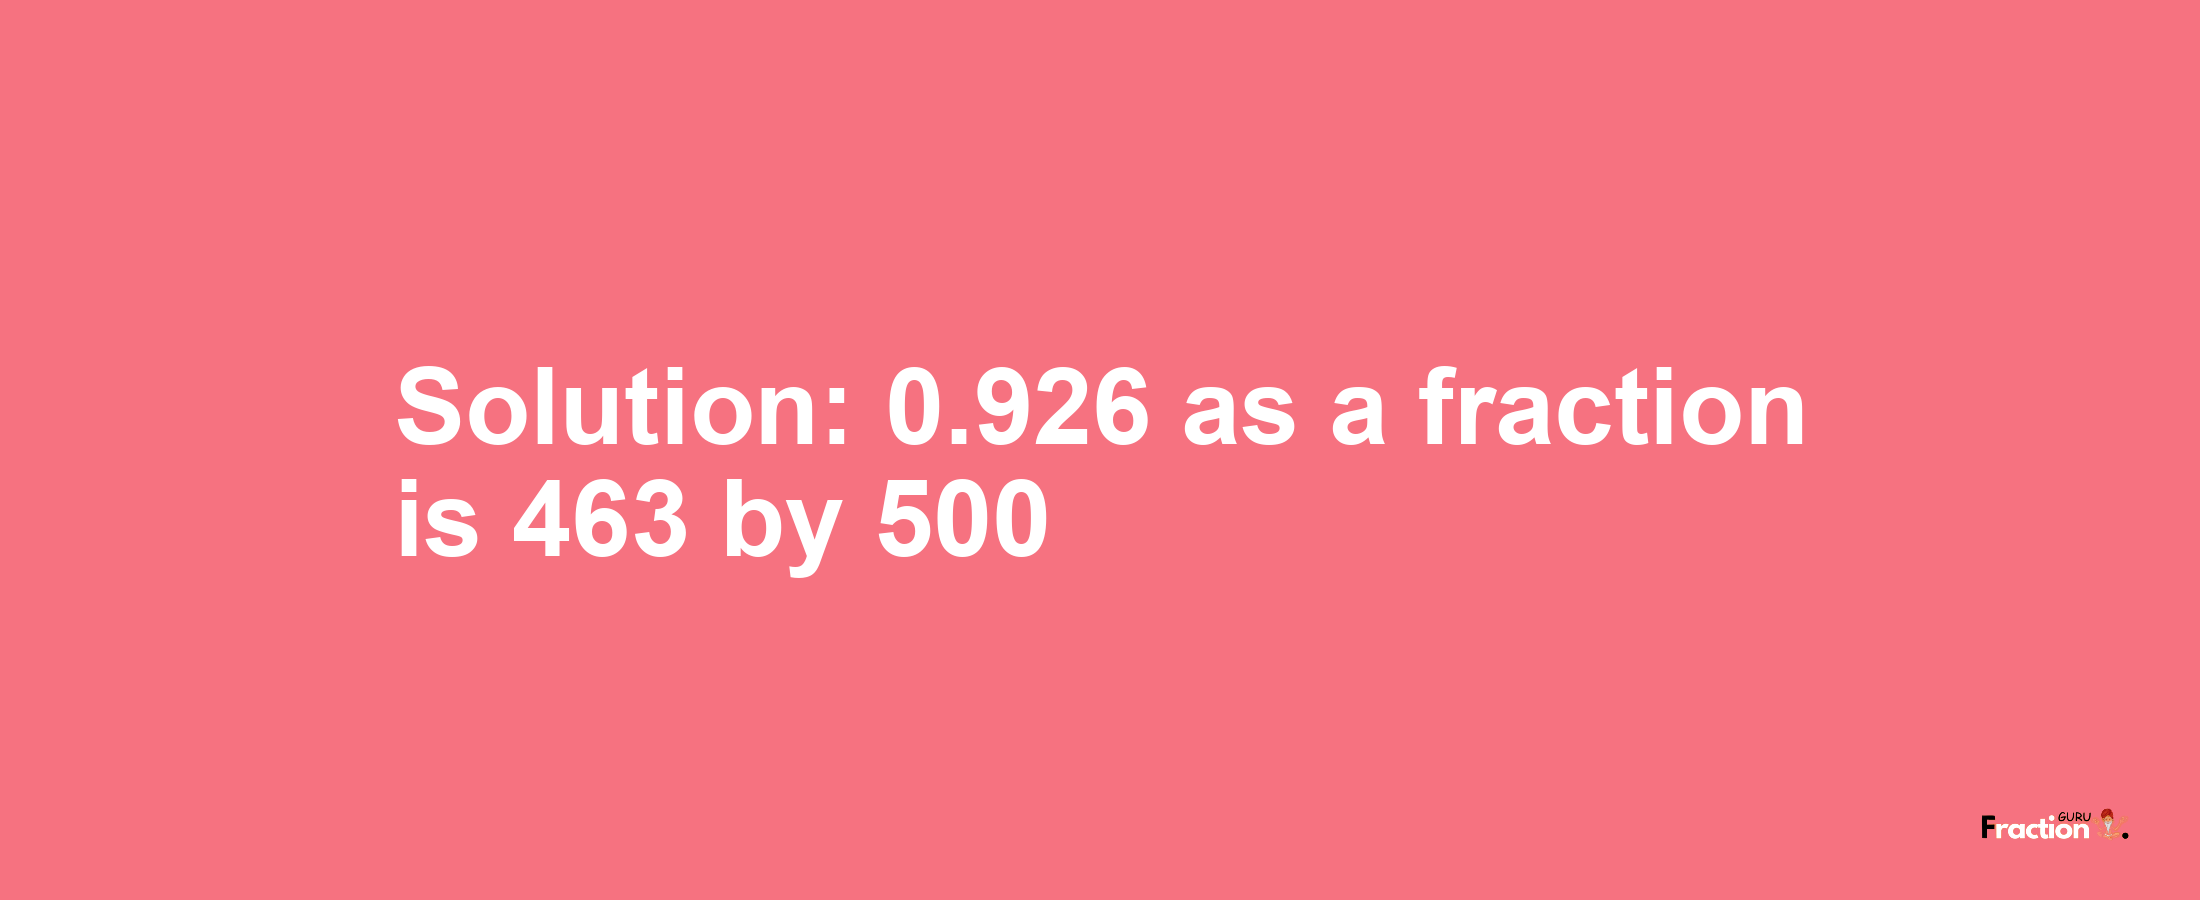 Solution:0.926 as a fraction is 463/500